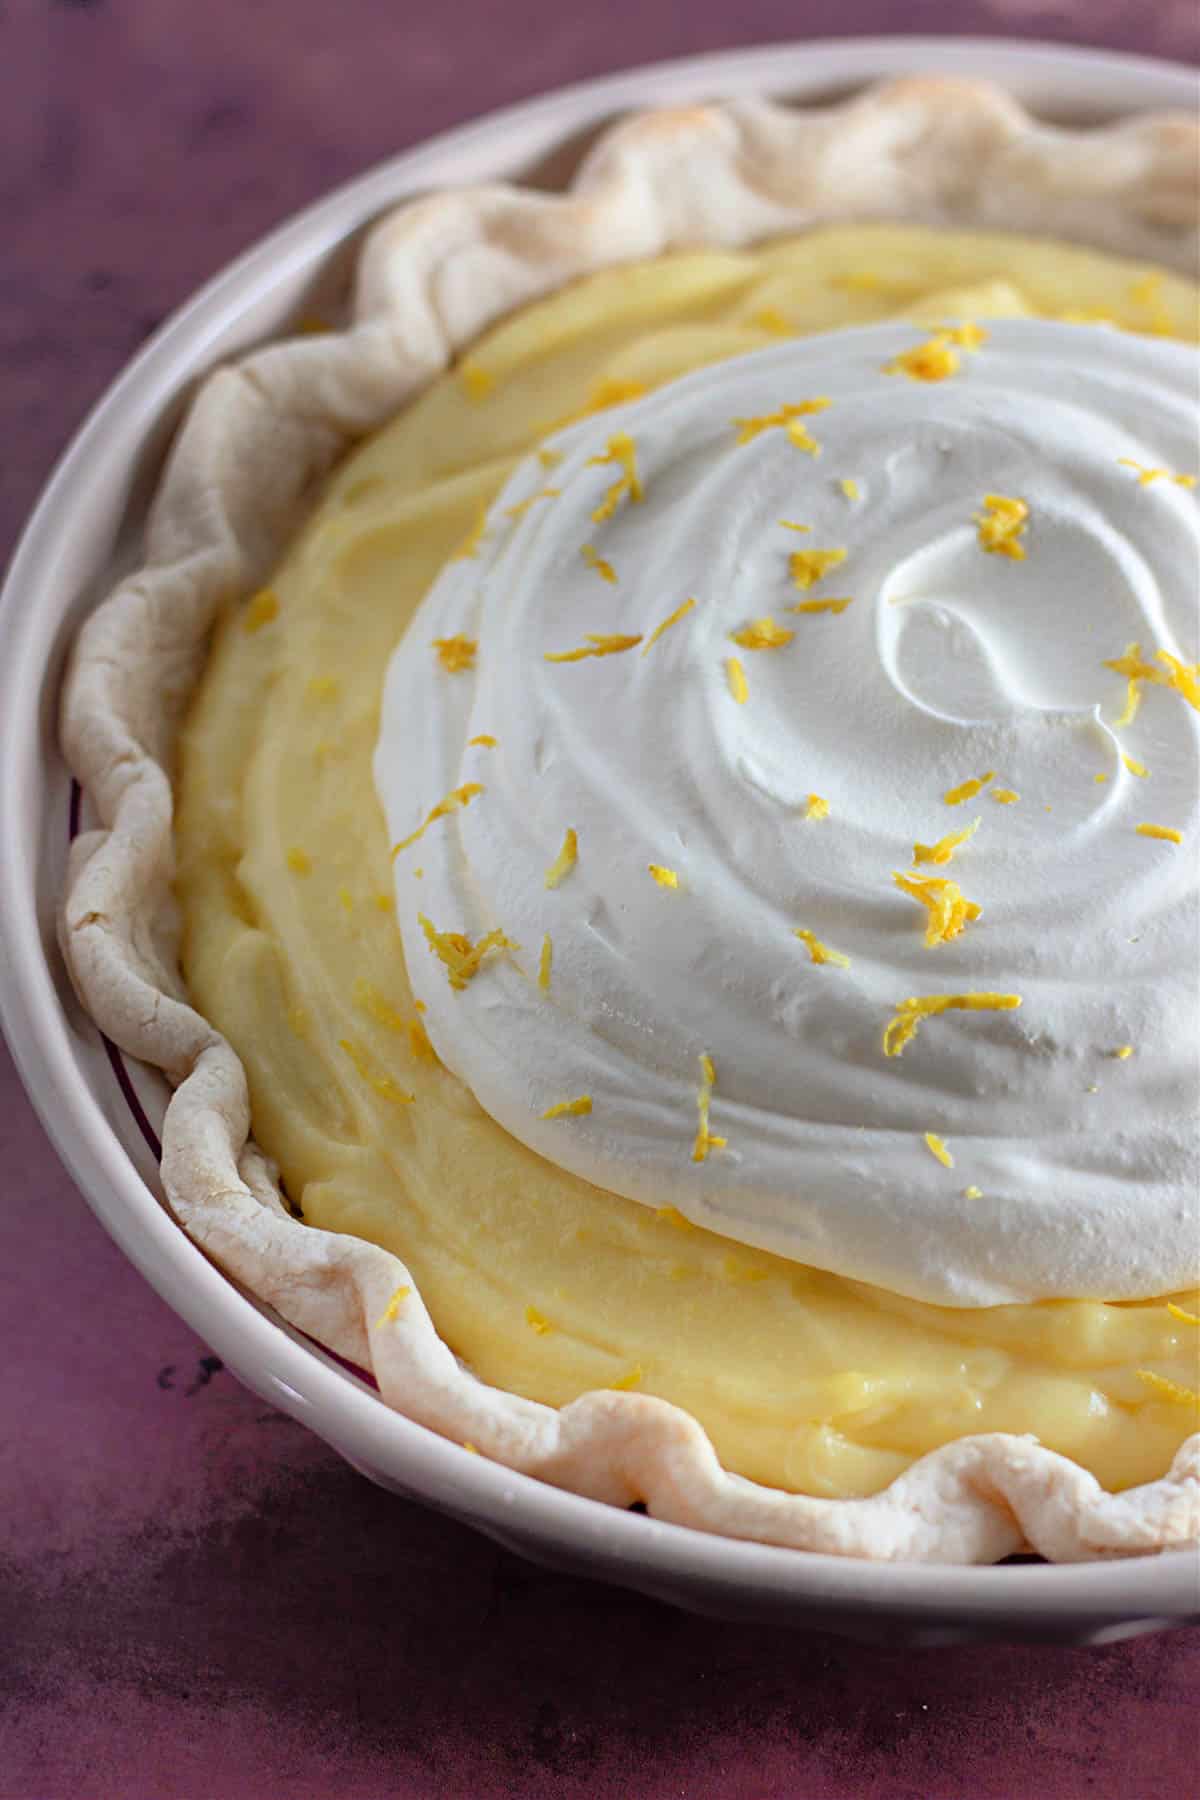 A creamy lemon pie with whipped topping.